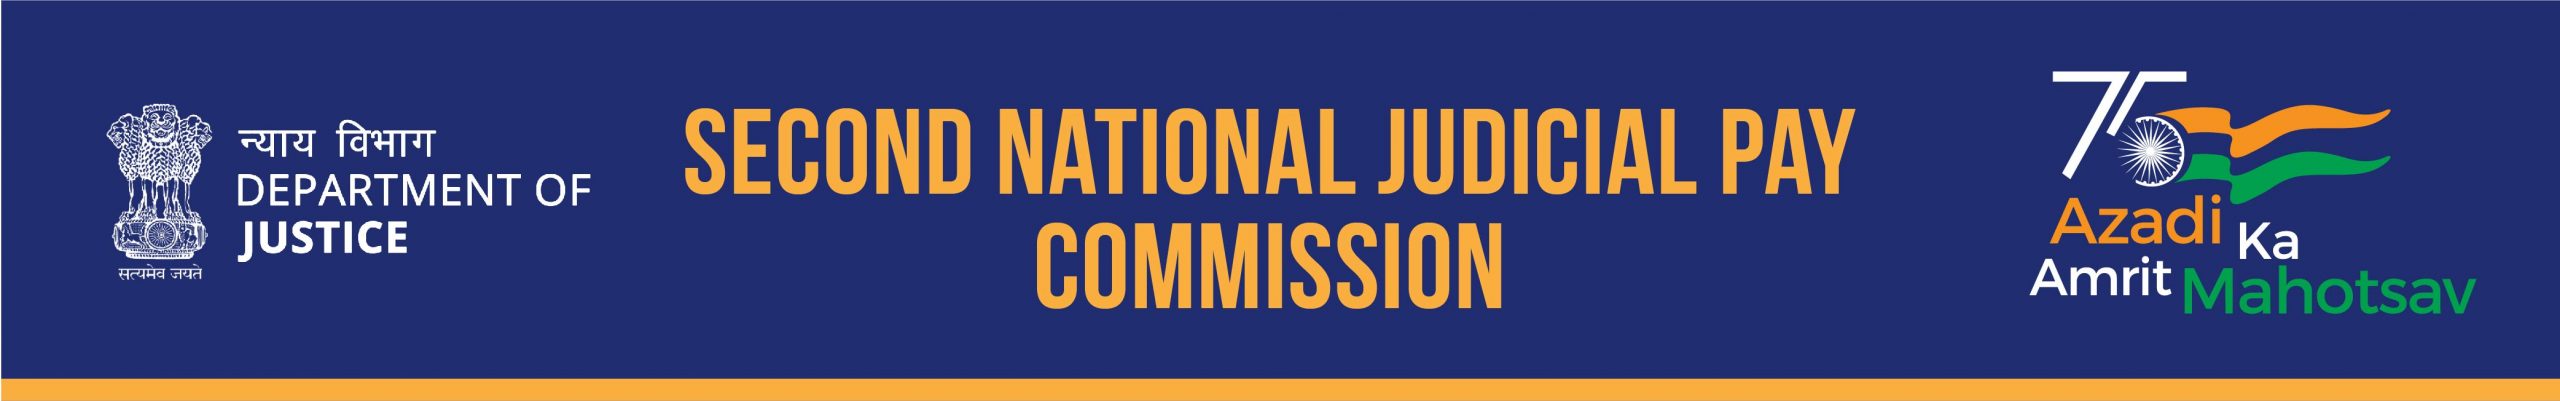 Second National Judicial Pay Commission